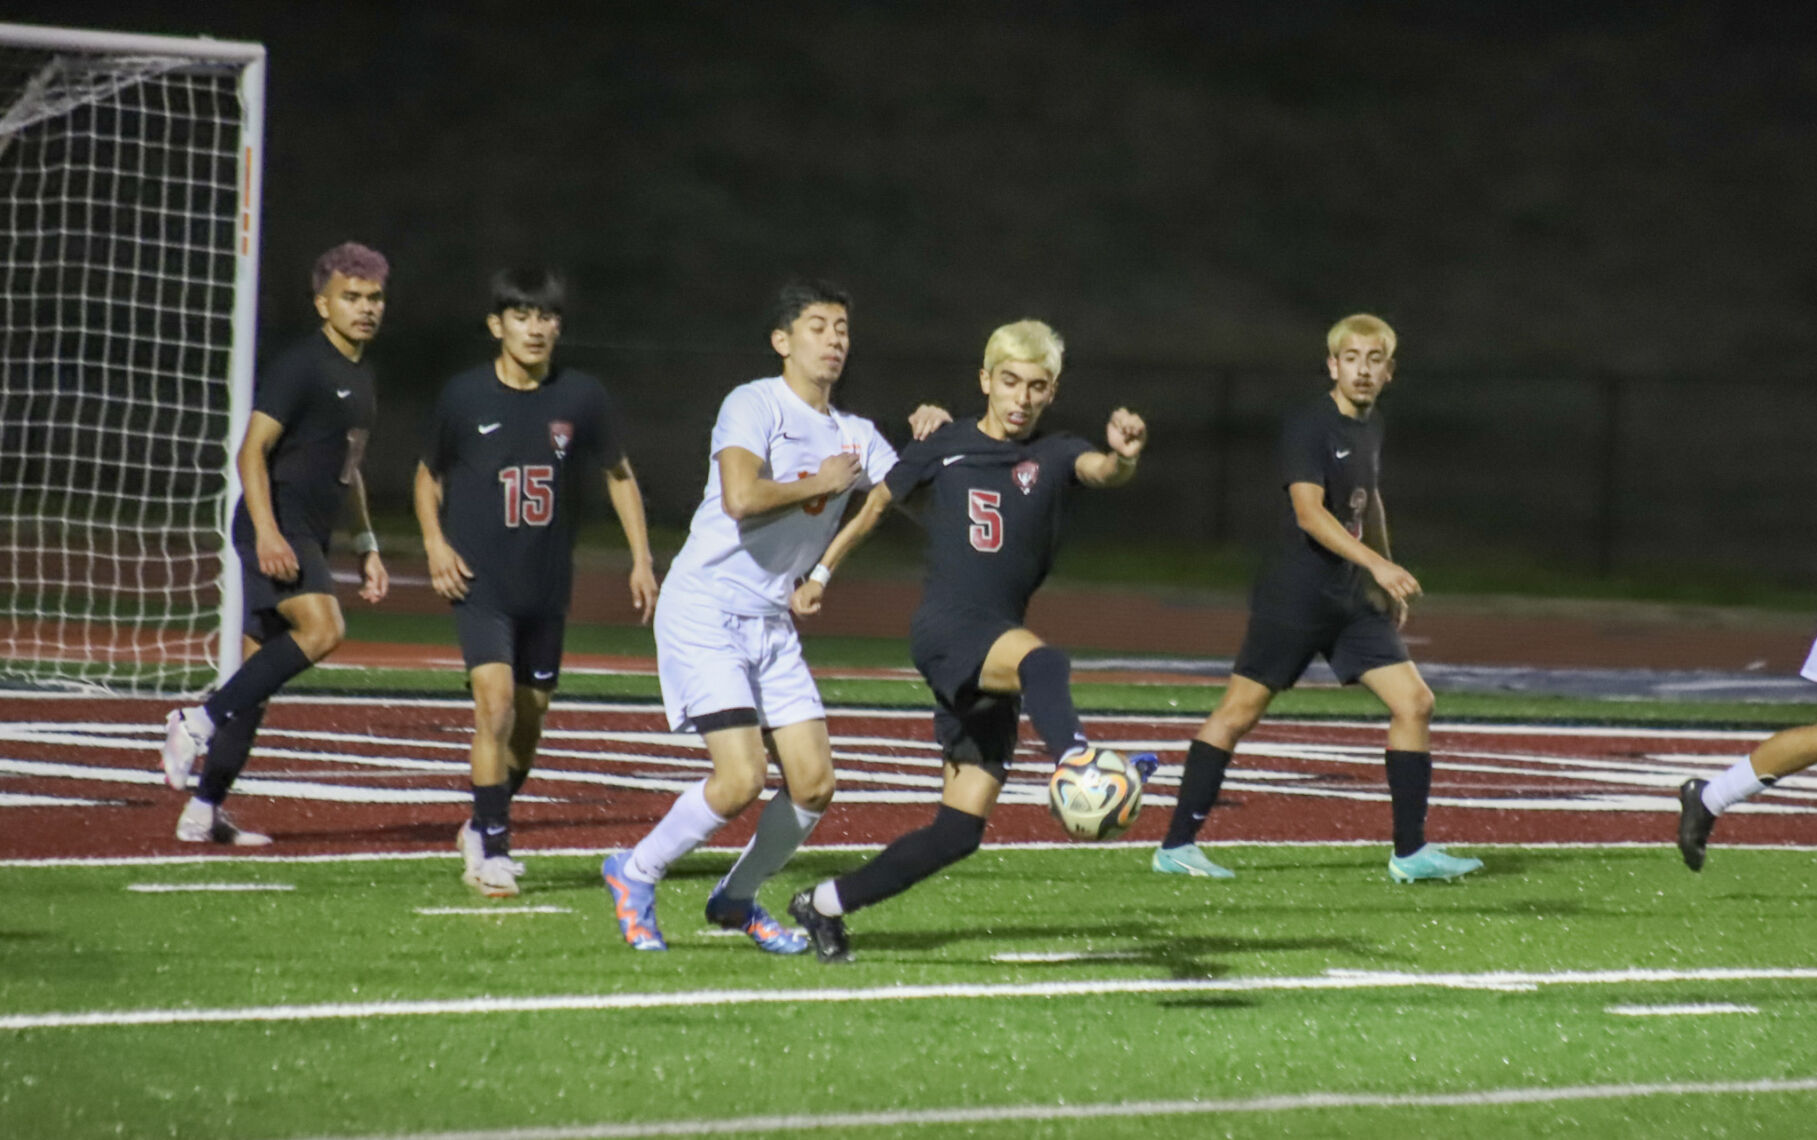 High School Soccer Results: Southeast Boys Triumph Over Northwest 2-1, Dalton Secures 3-0 Victory